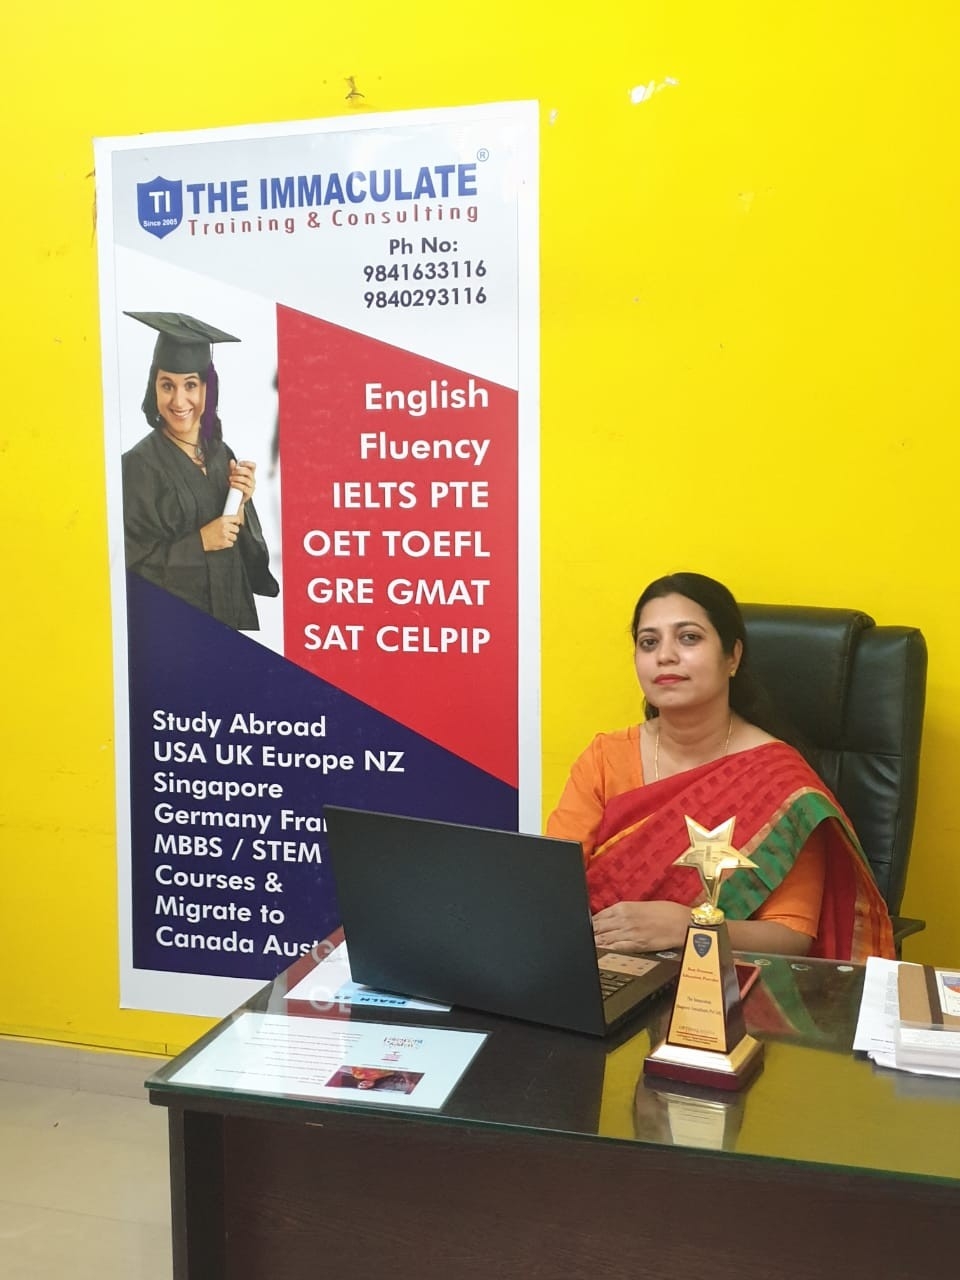 THE IMMACULATE Training and Consulting